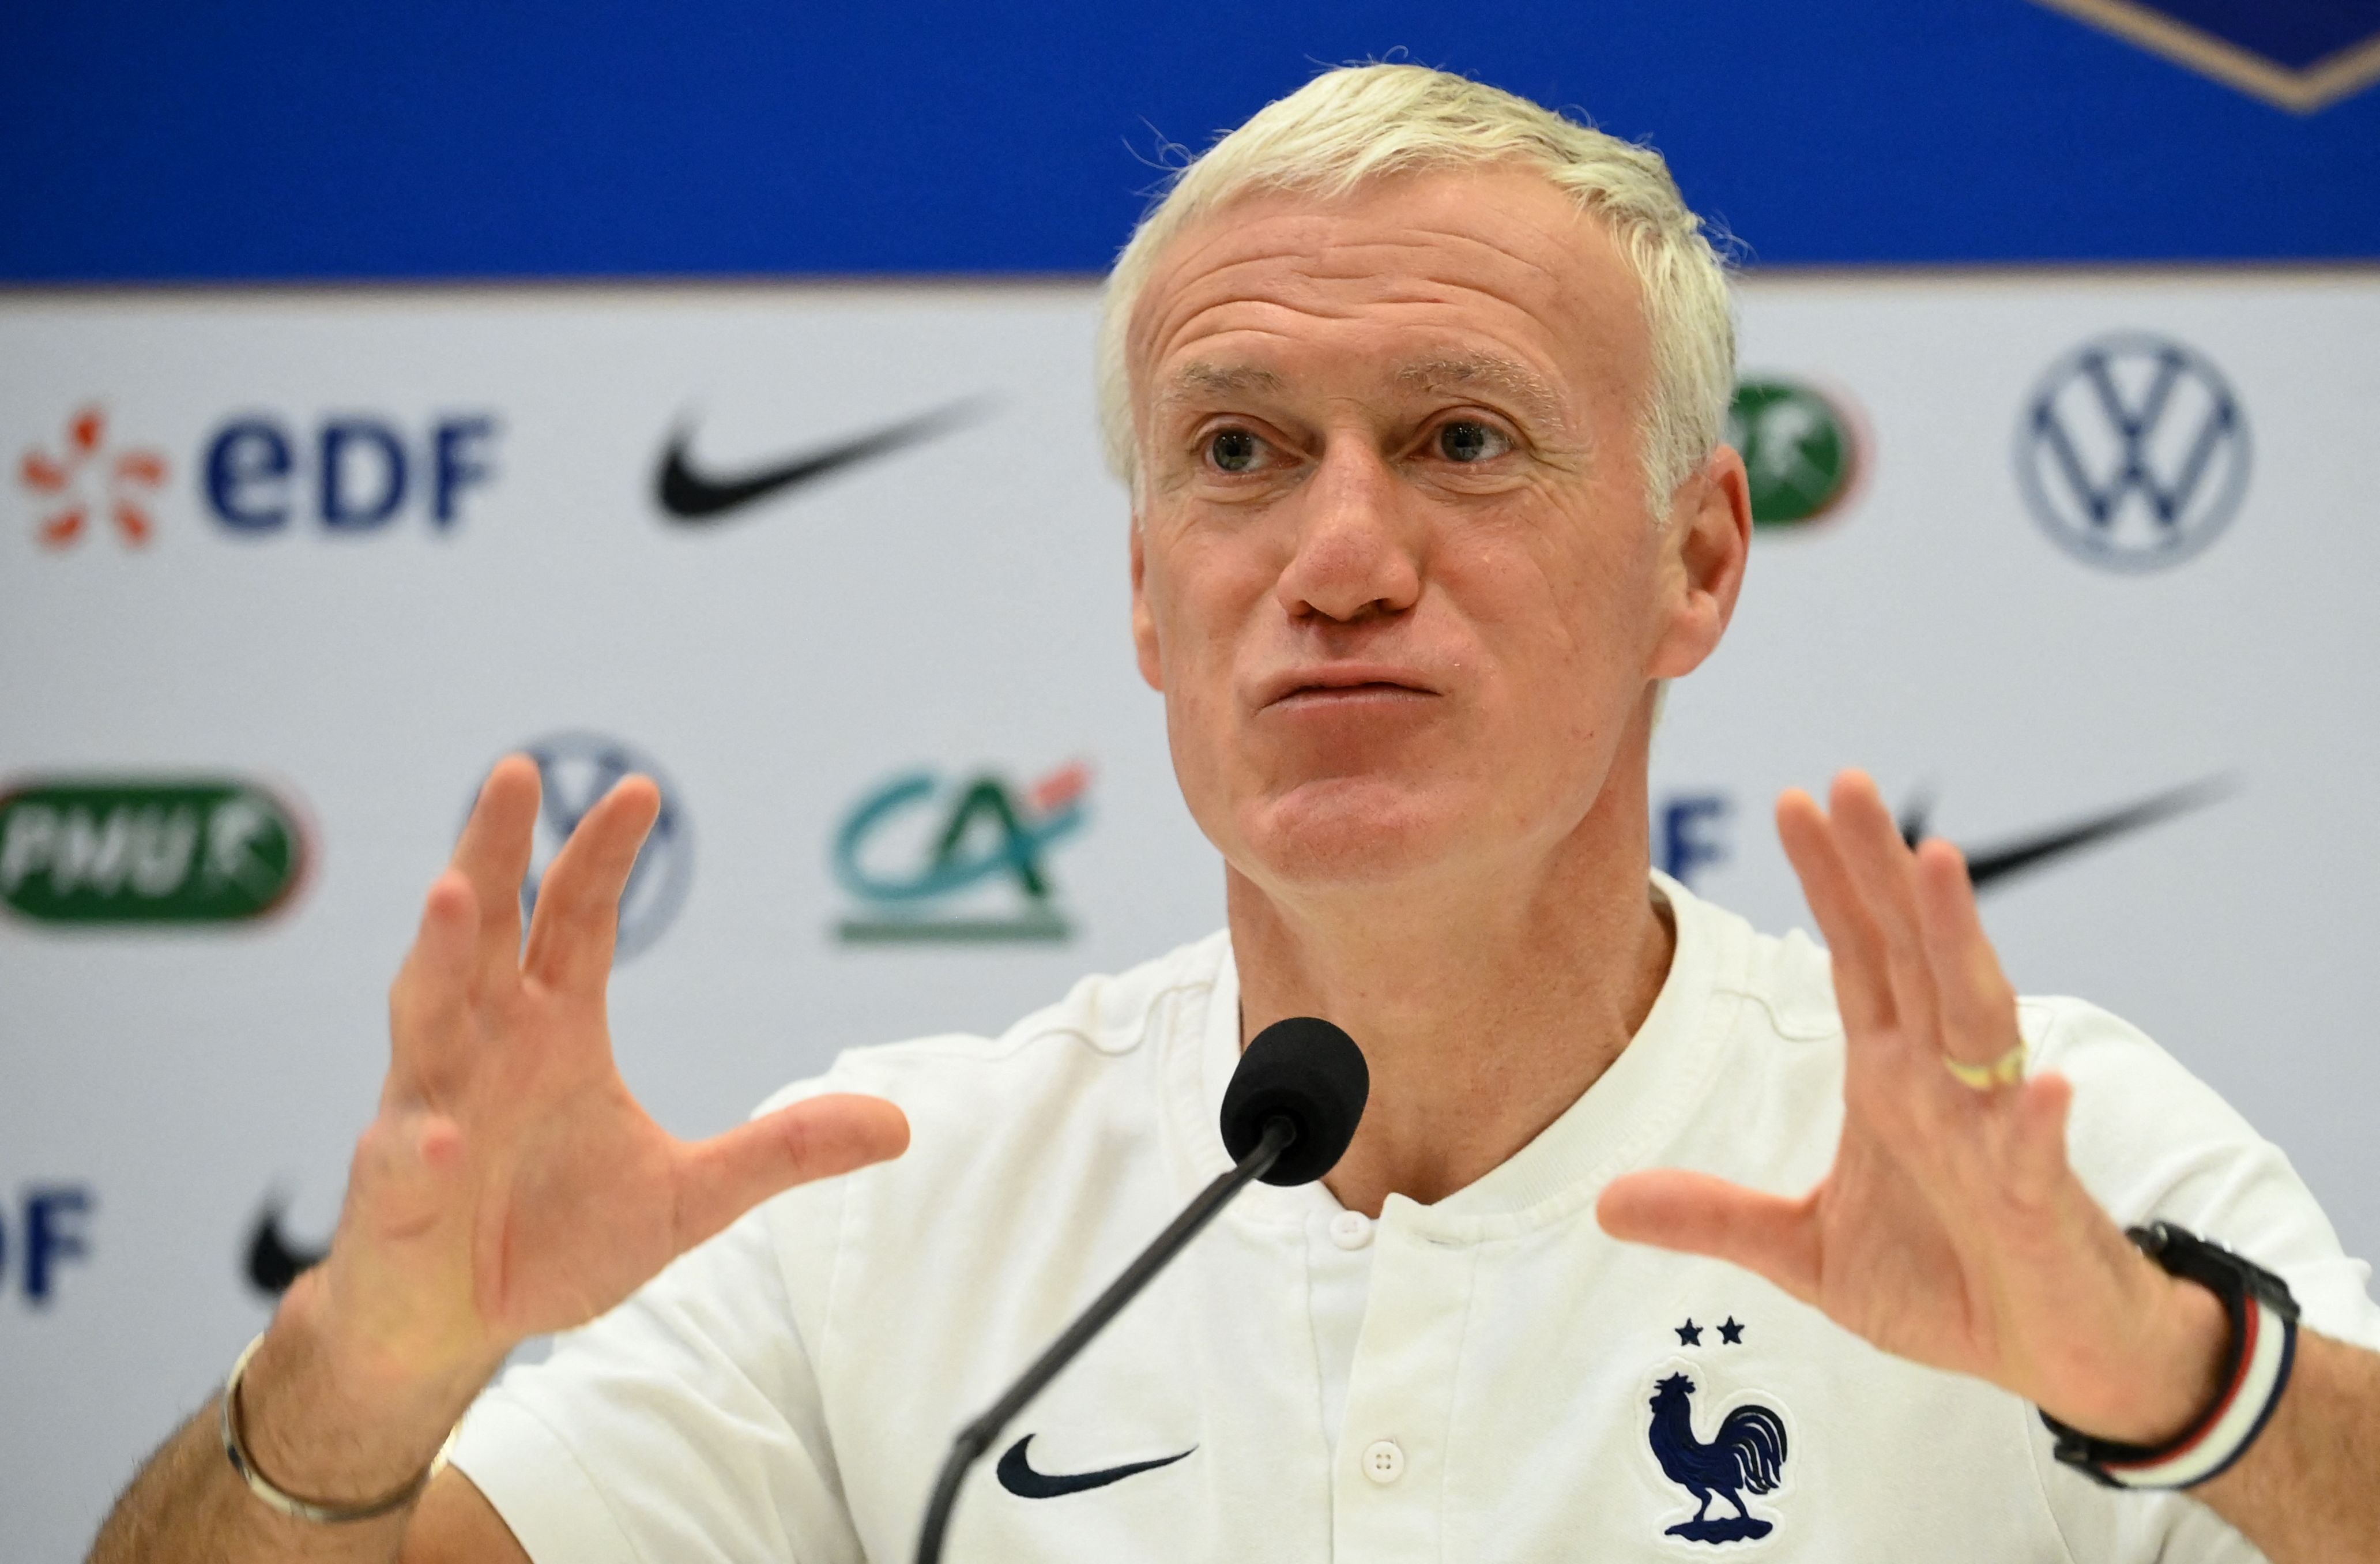 Didier Deschamps will lead tournament favourites France at Euro 2020